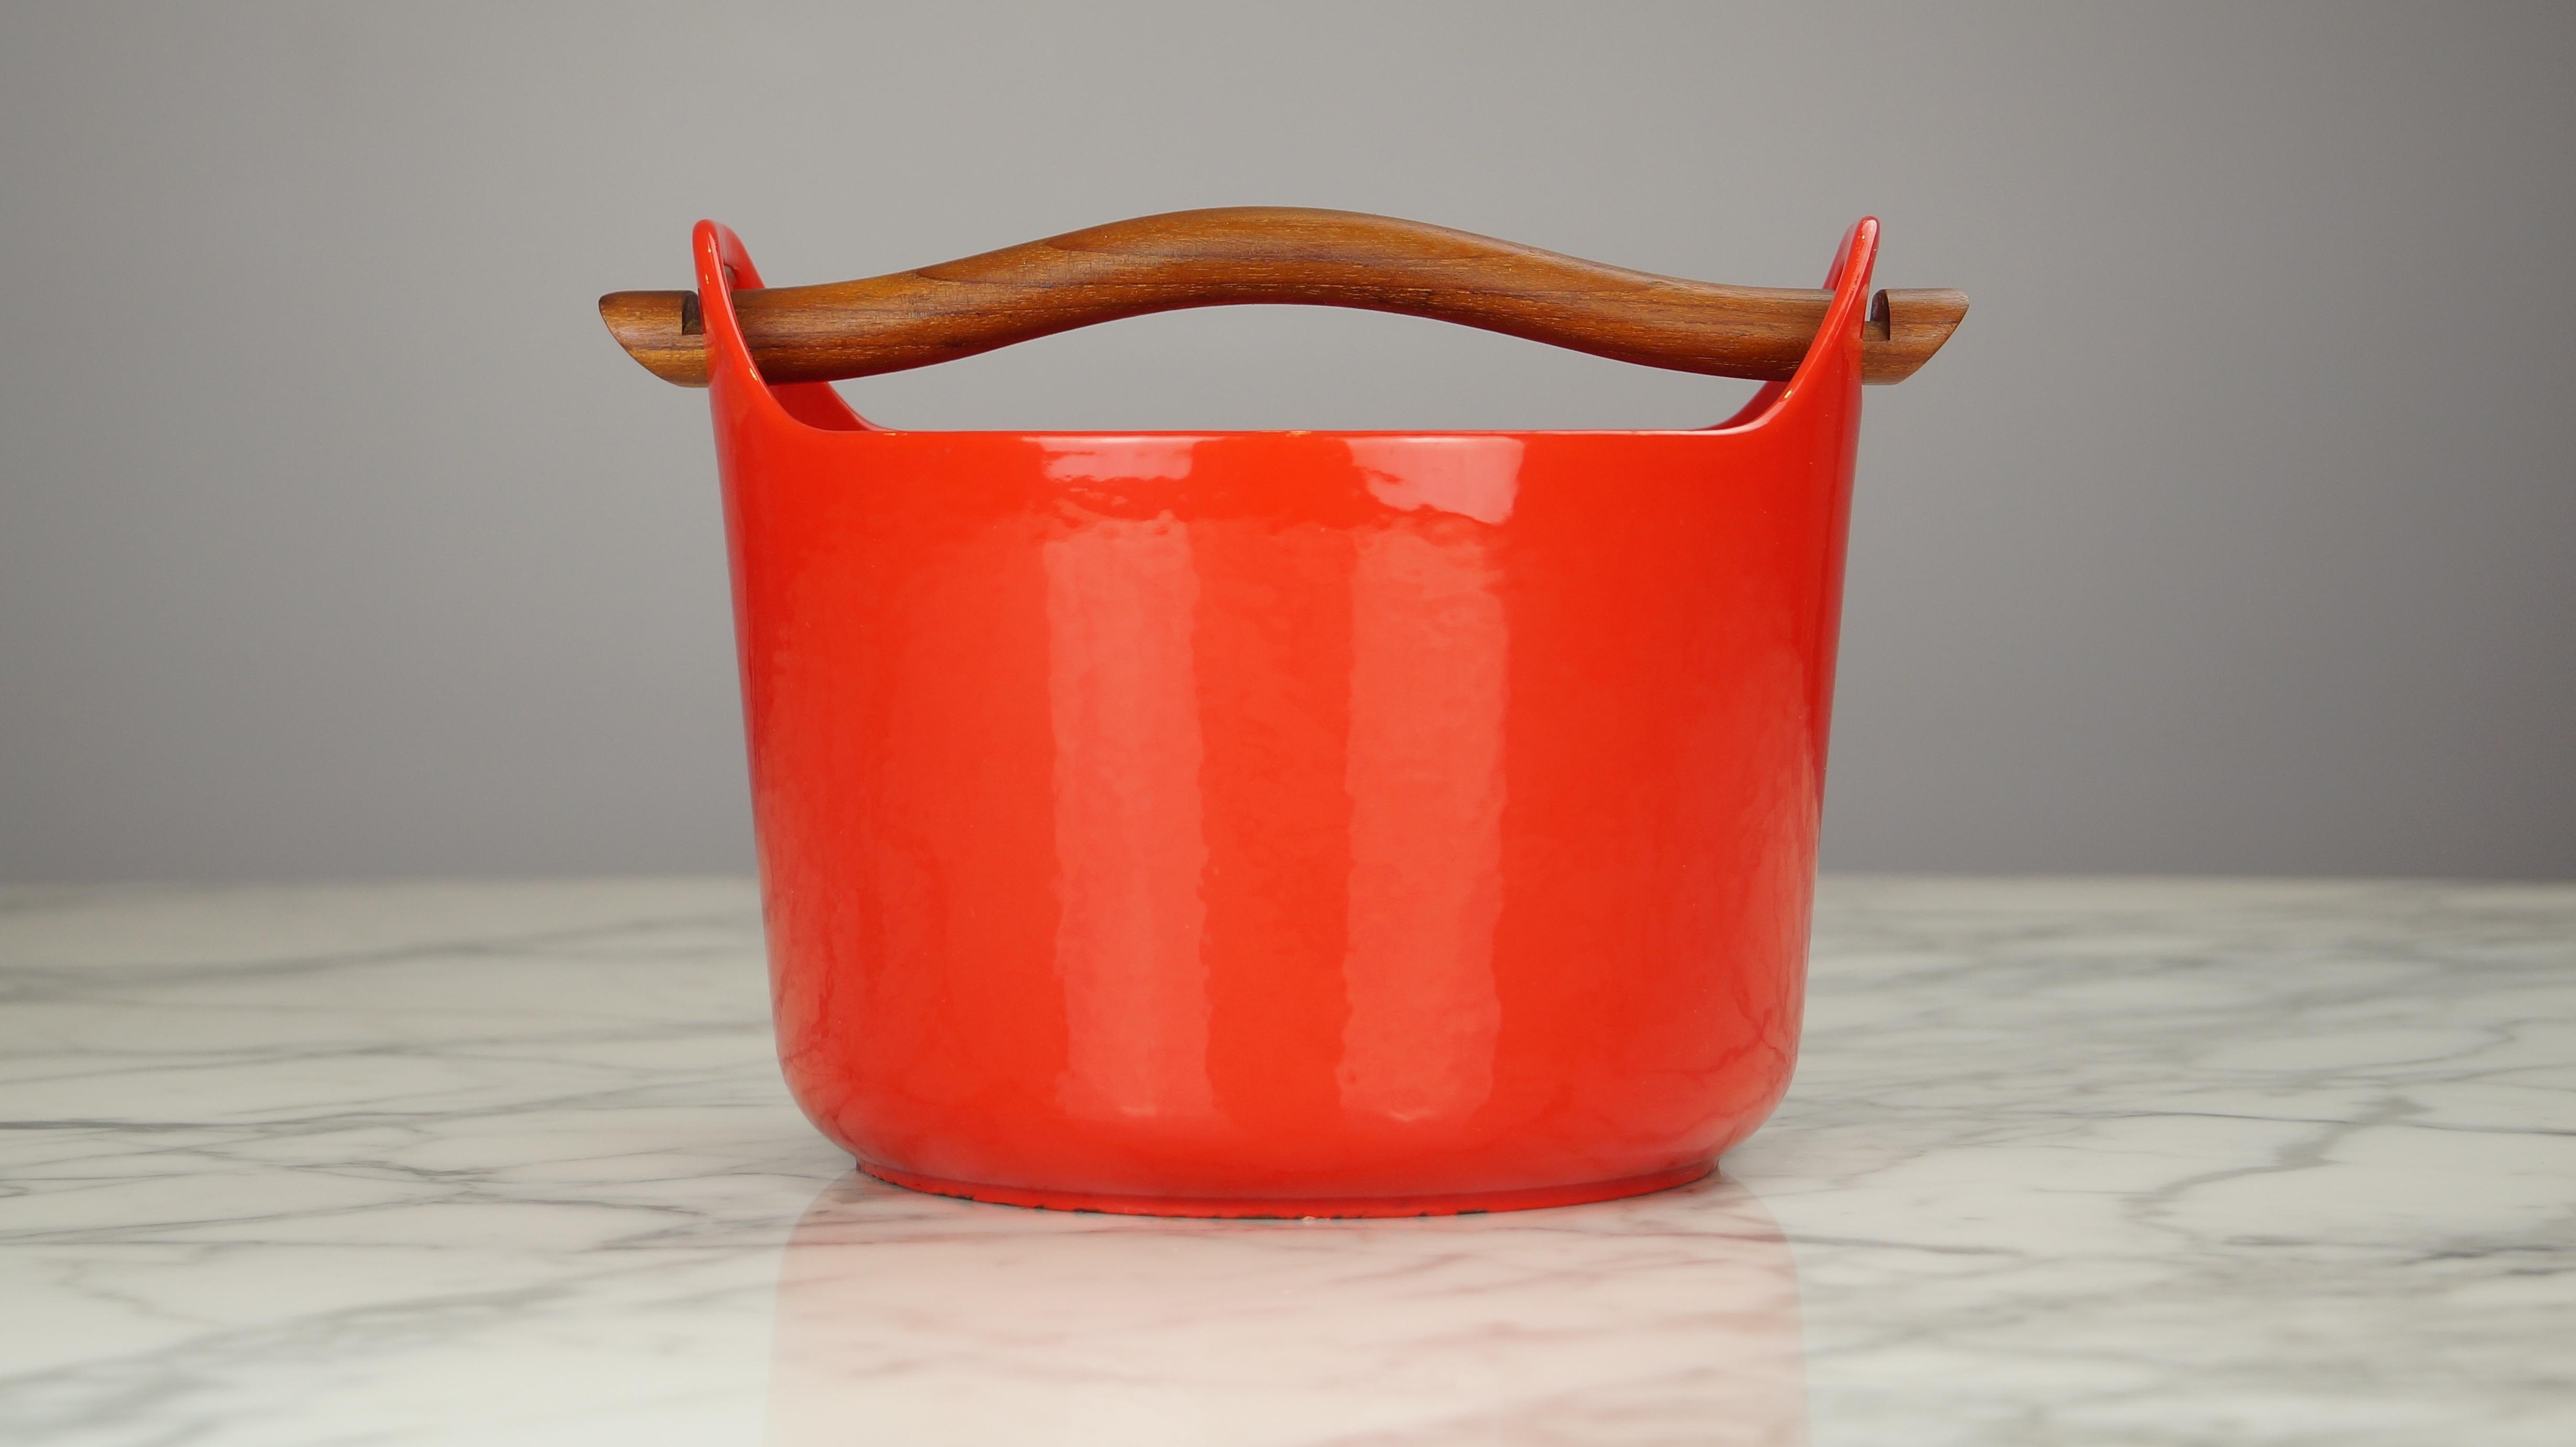 Original vintage red enamel cast iron casserole pot designed By Timo Sarpaneva for W. Rosenlew and Co of Finland, 1959

In absolutely fantastic condition, this iconic design cooks beautifully and looks gorgeous on display. Famously celebrated in